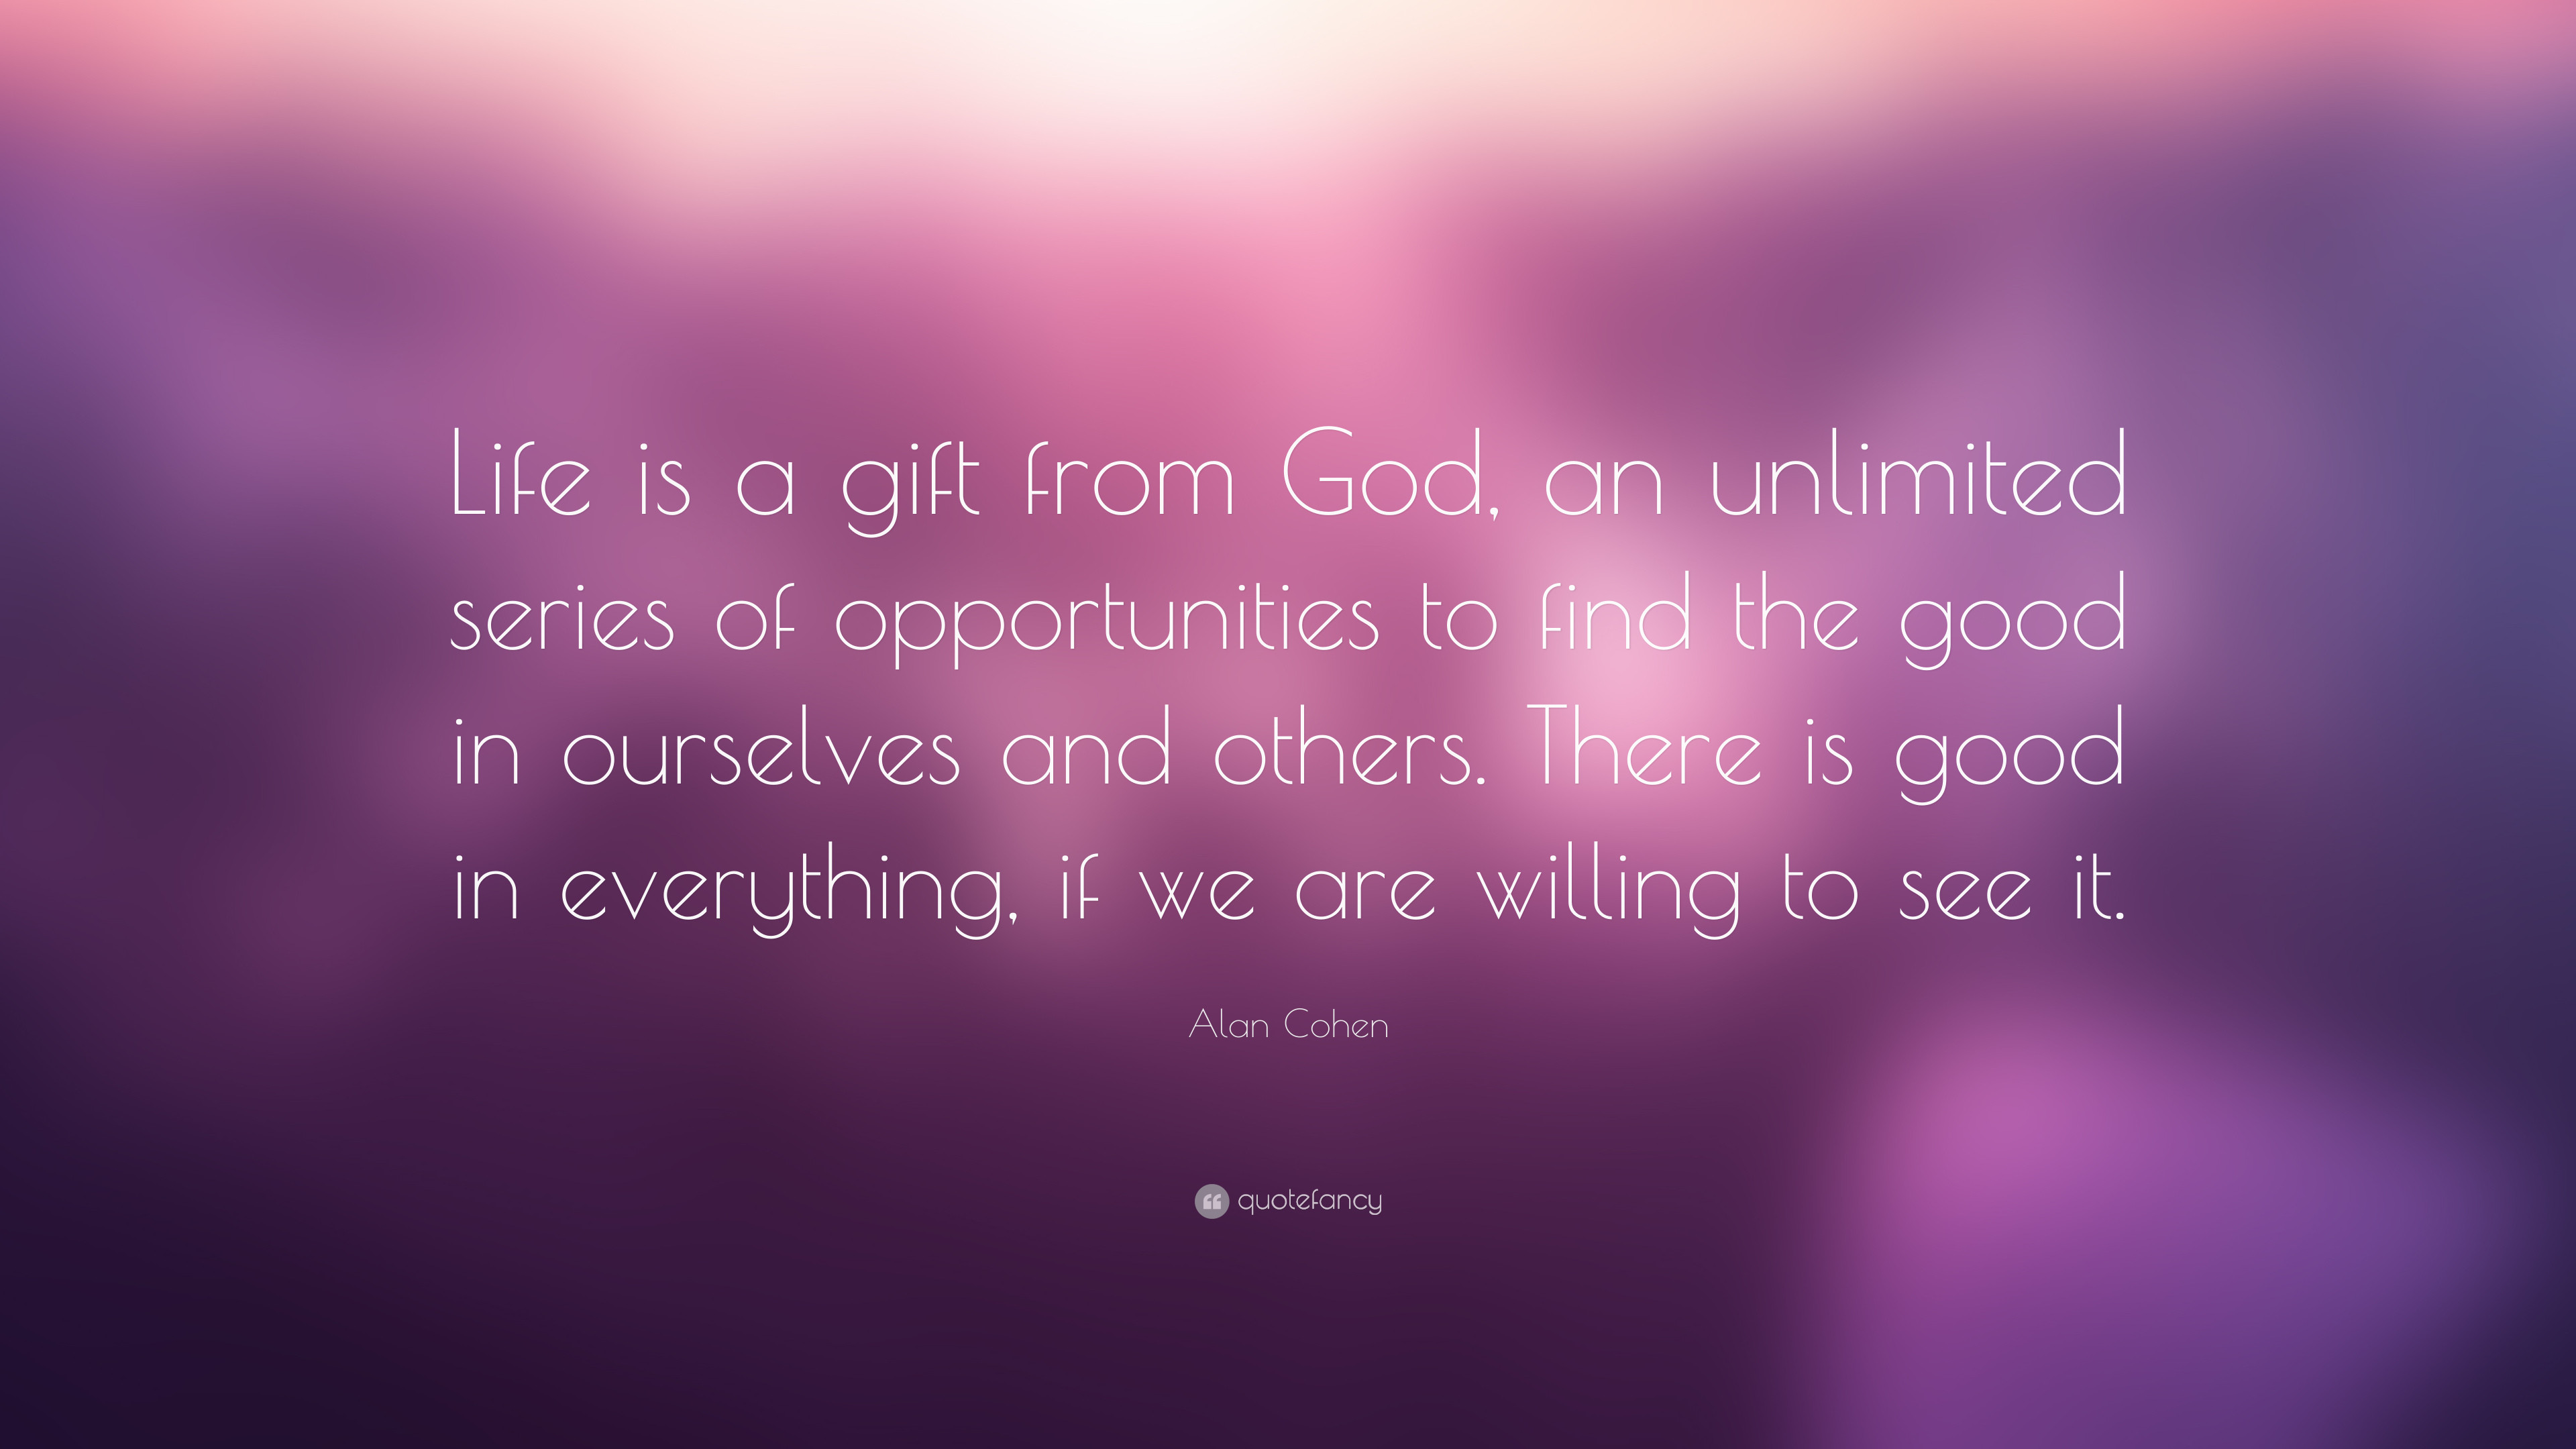 Life Is A Gift Quotes
 Alan Cohen Quote “Life is a t from God an unlimited